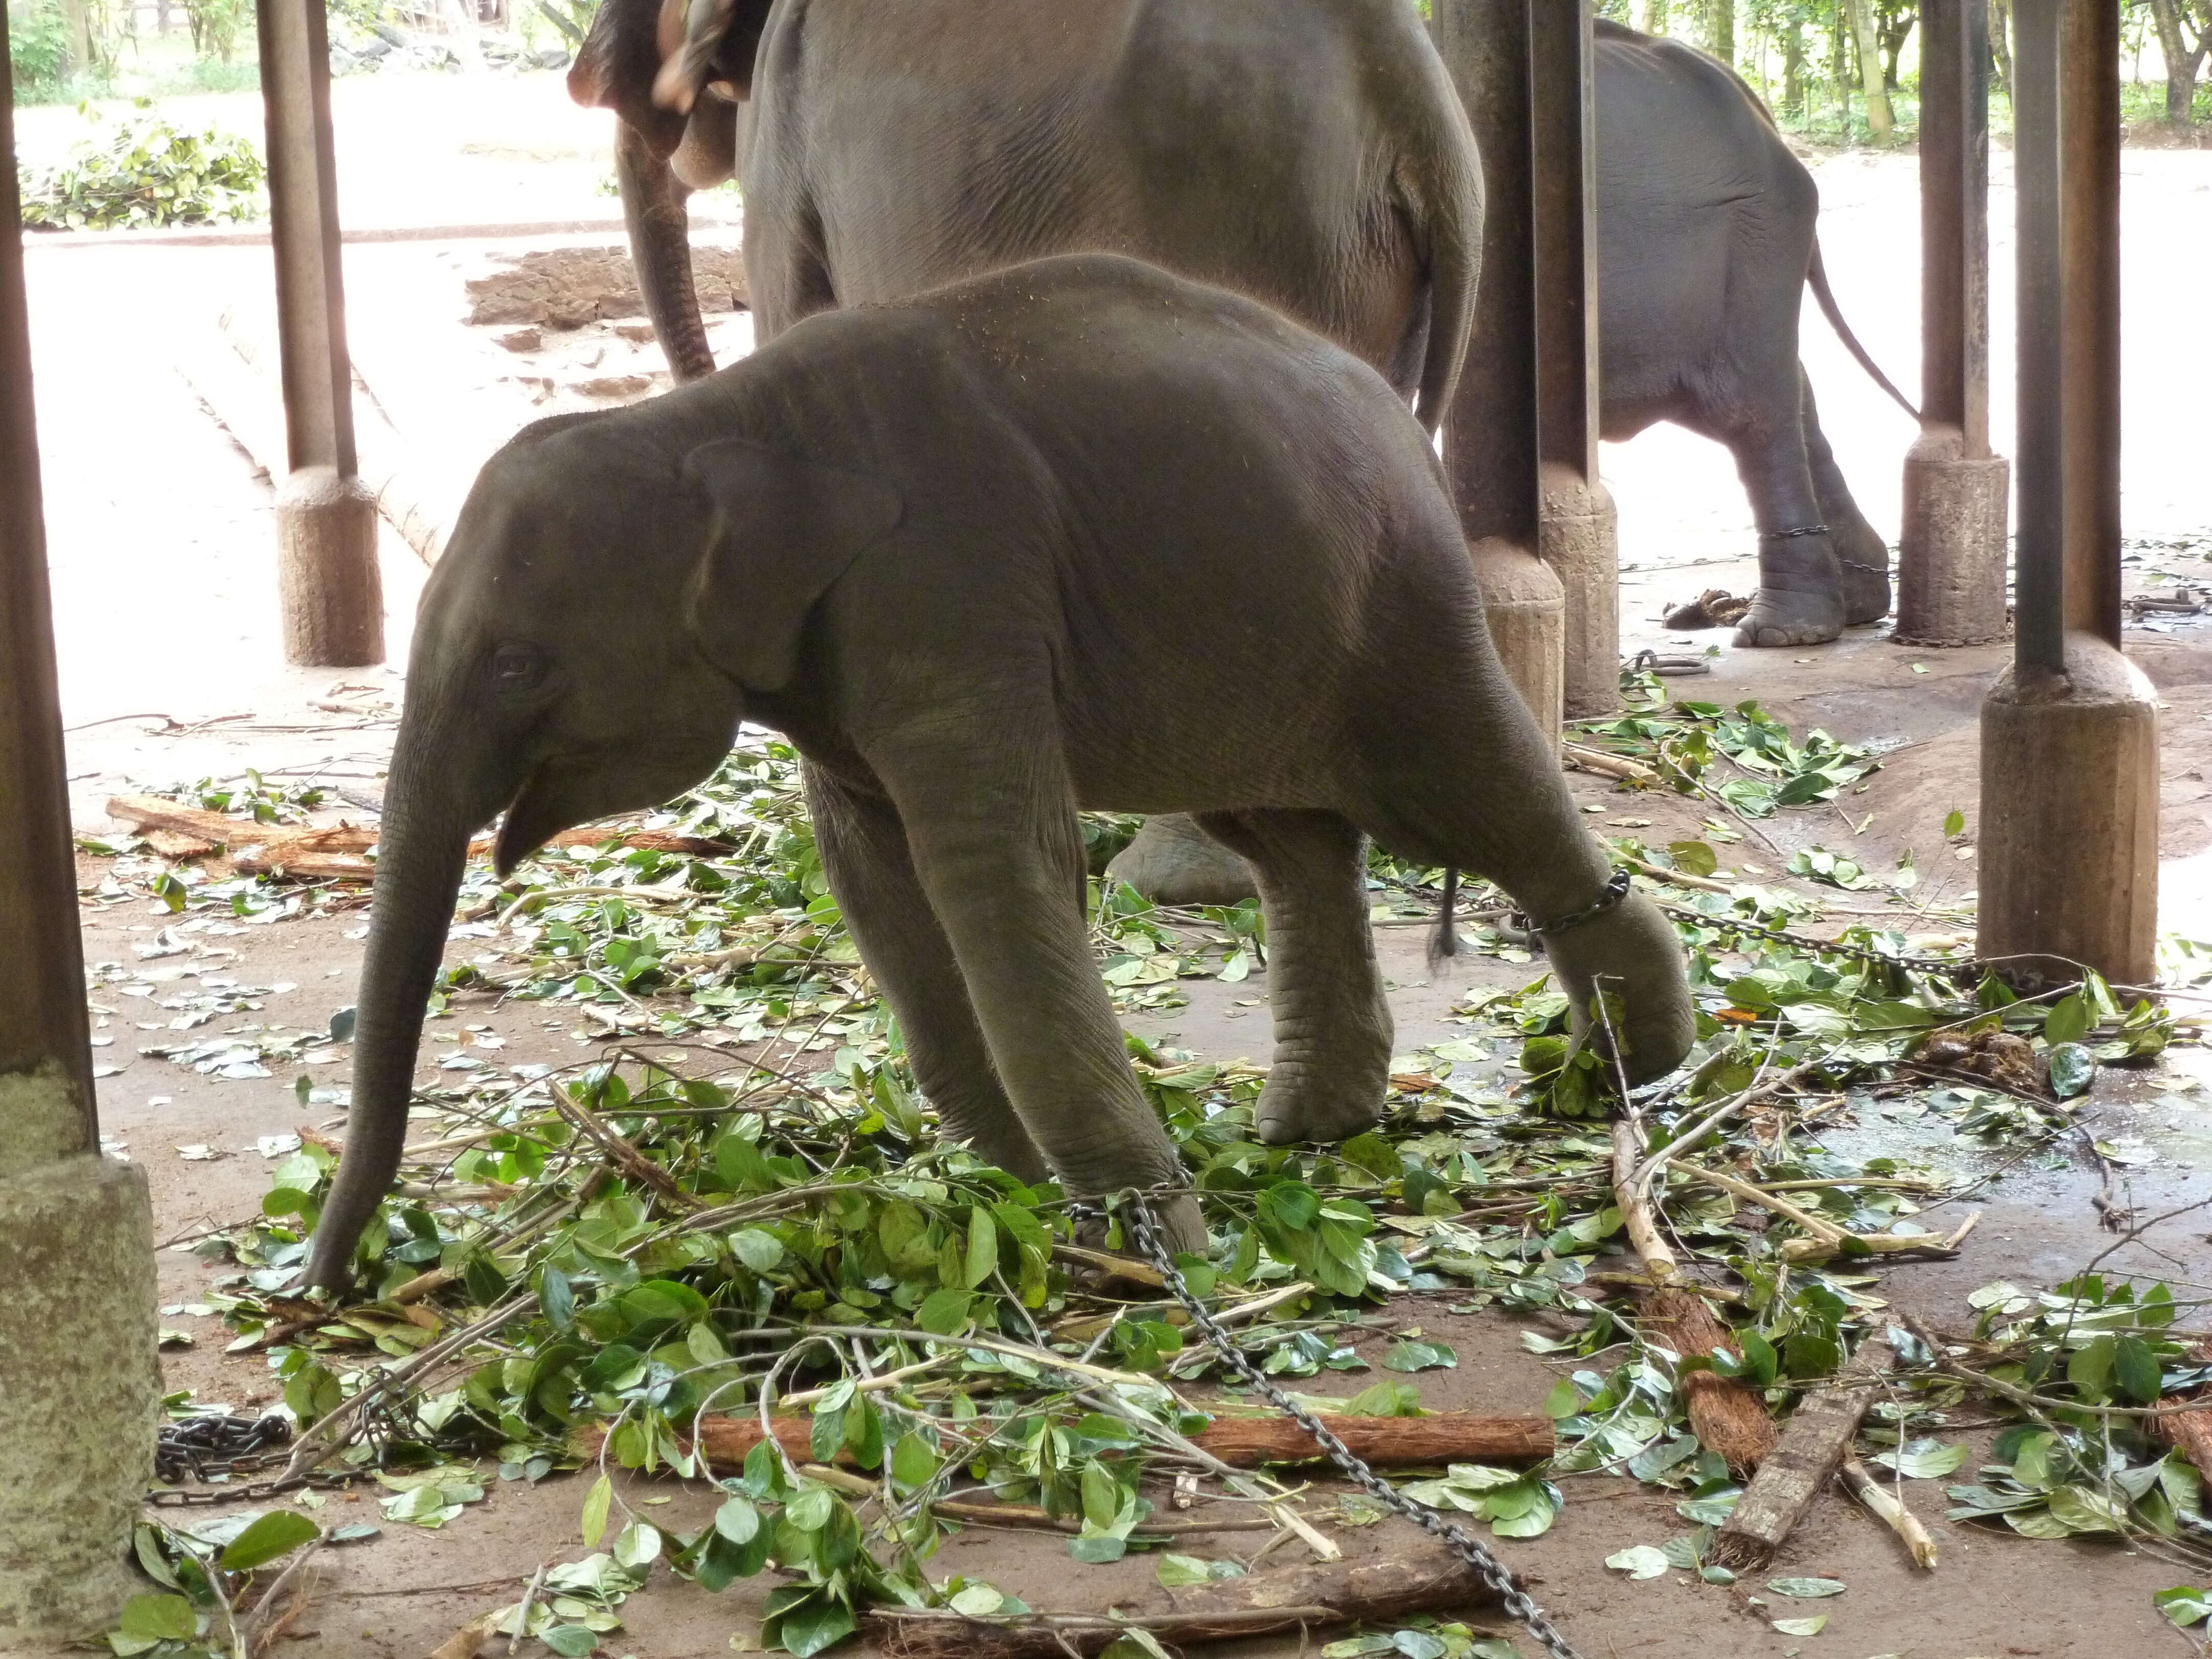 Baby elephant chained up